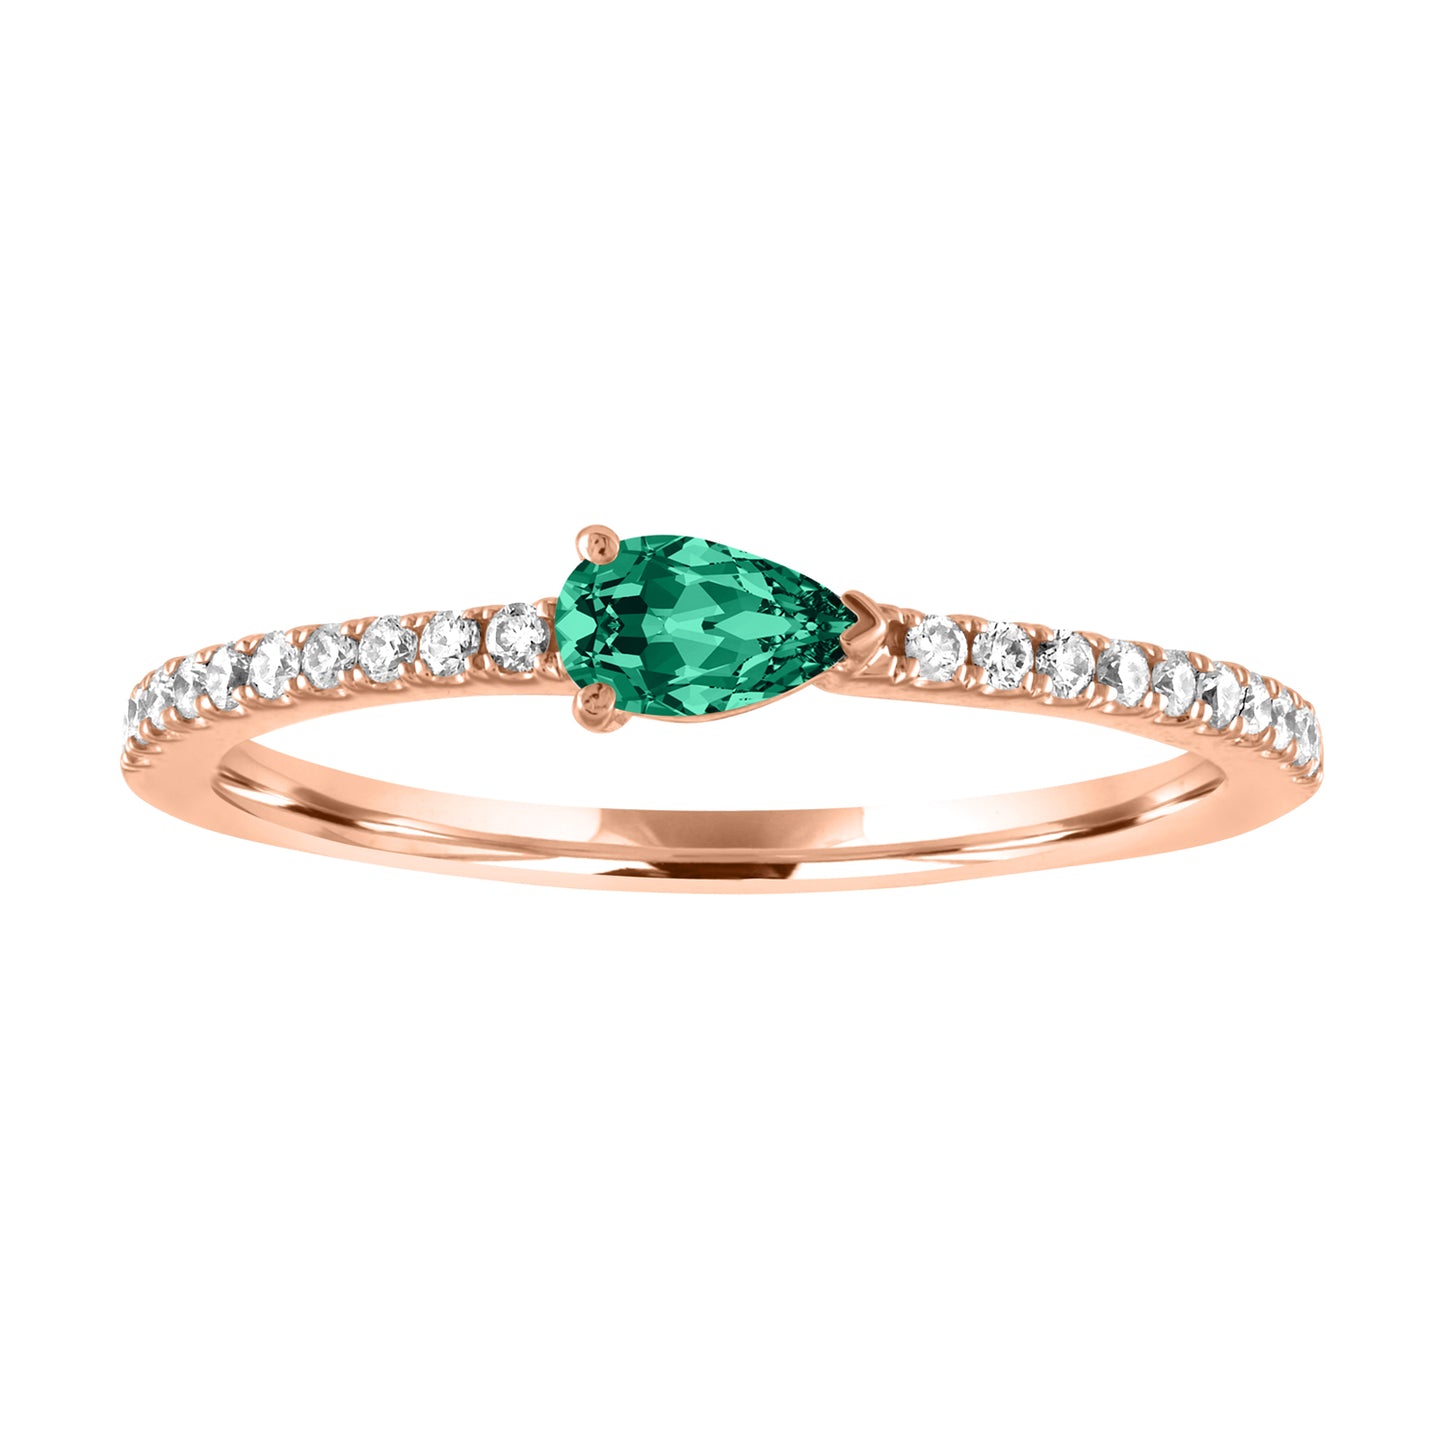 Rose gold skinny band with a pear shaped emerald in the center and round diamonds on the shank. 